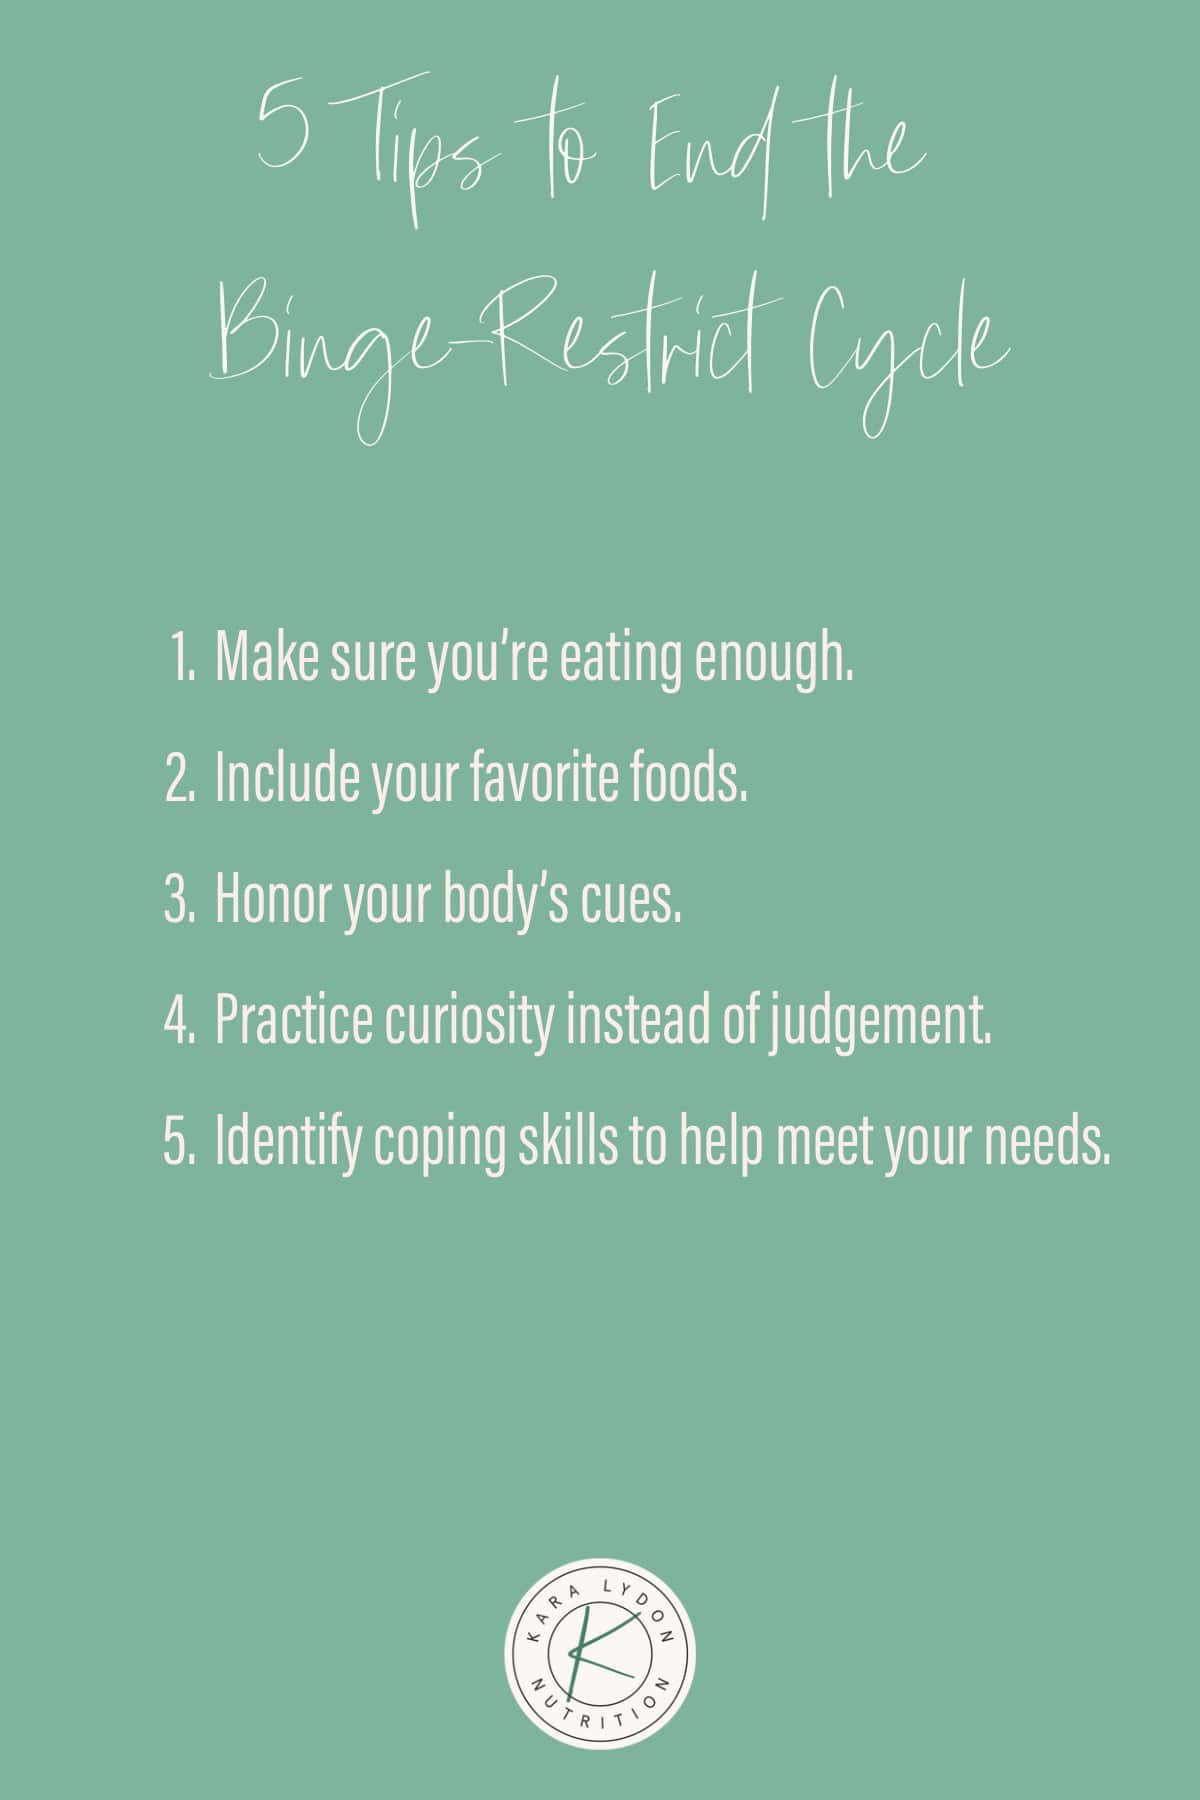 Graphic listing 5 tips to end the Binge-Restrict Cycle.